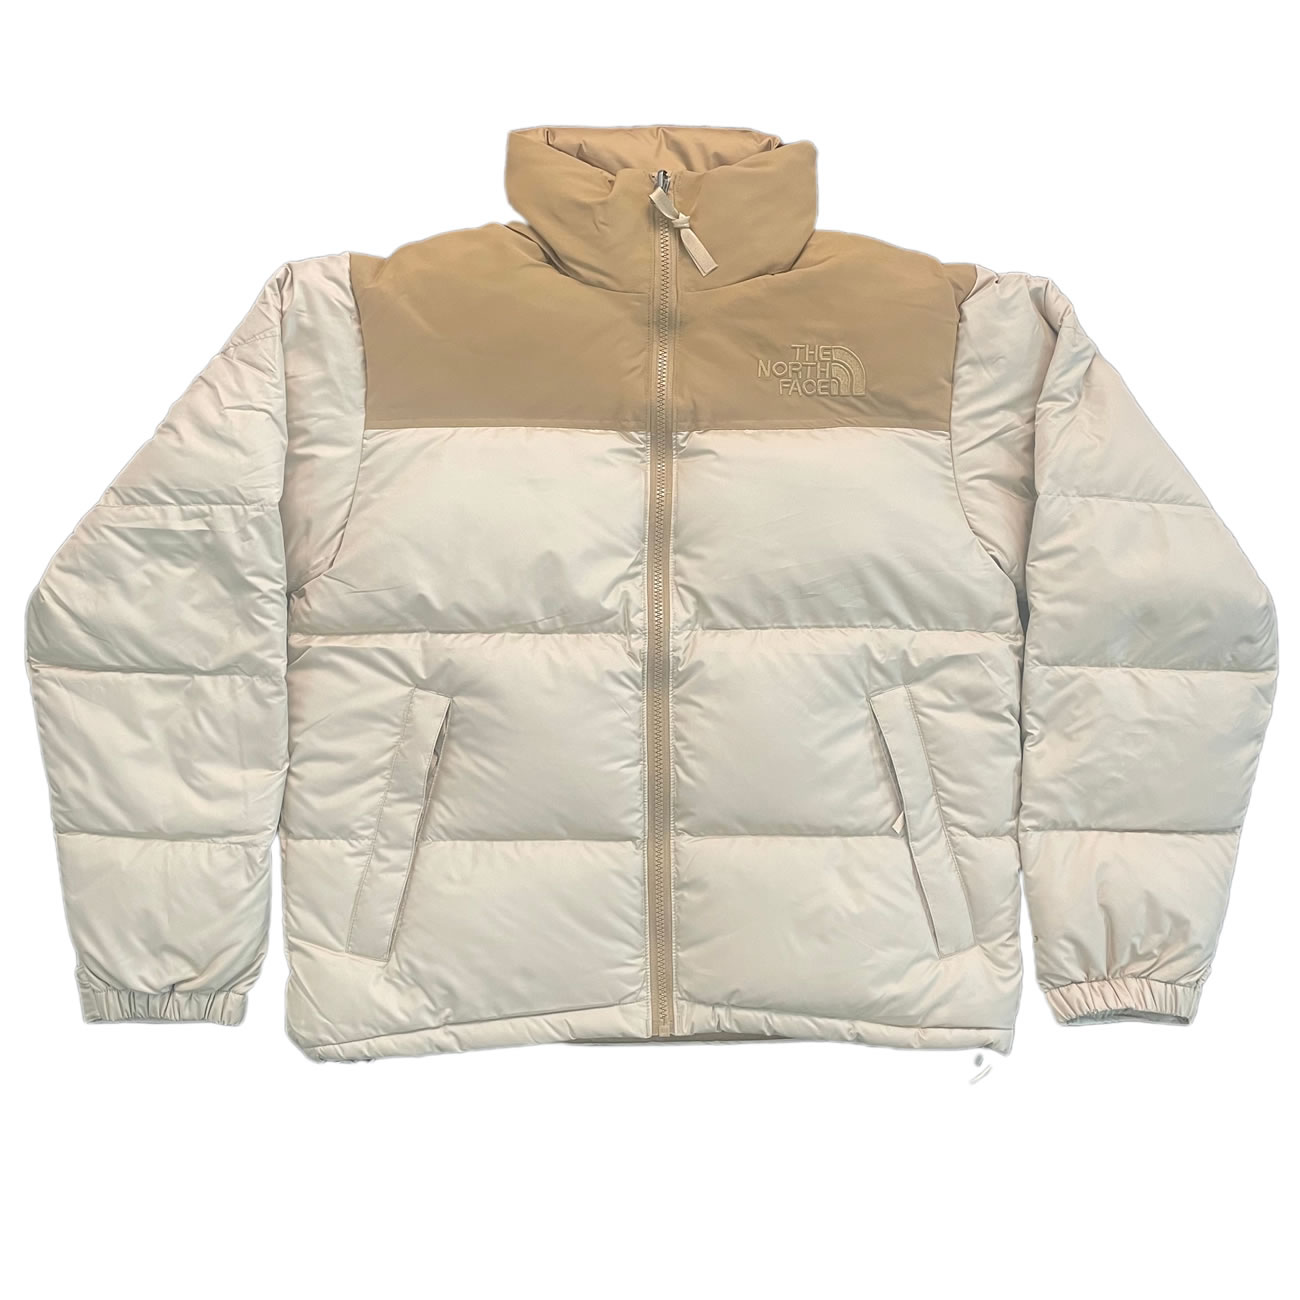 The North Face 1996 Retro Nuptse Packable Jacket Fw21 (4) - newkick.org